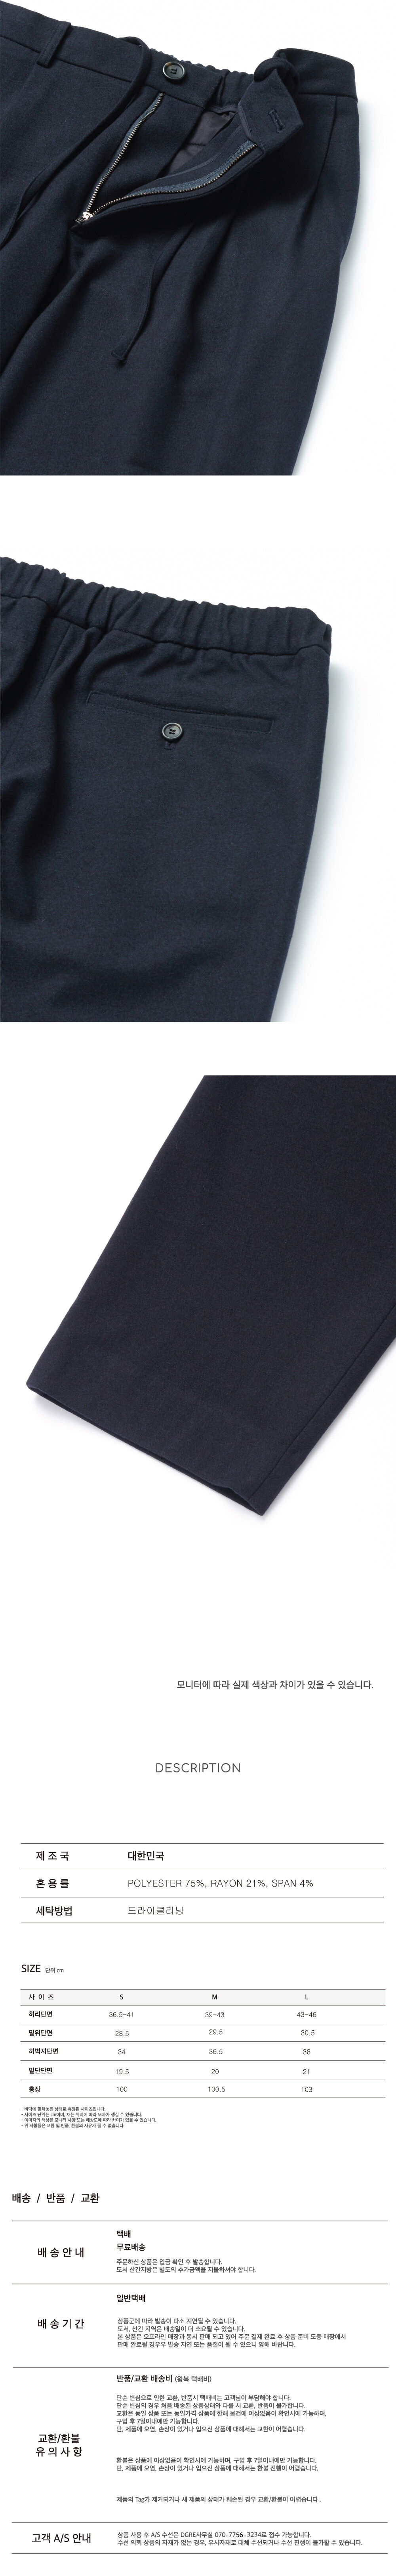 SOHO WIDE TAPERED FIT EASY PANTS NAVY